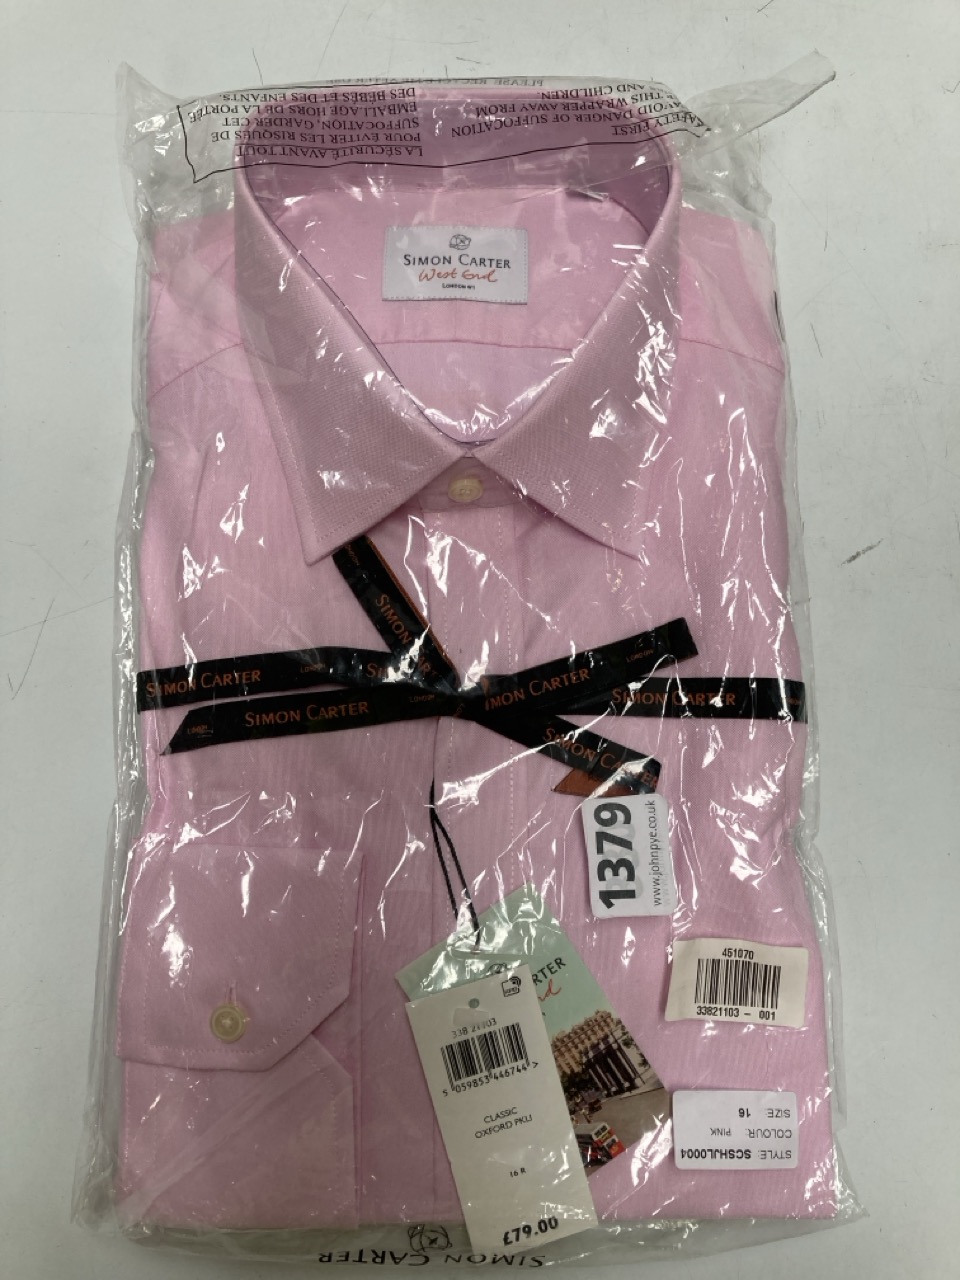 2 X MEN'S SHIRTS TO INCLUDE SIMON CARTER PINK SHIRT IN SIZE 16